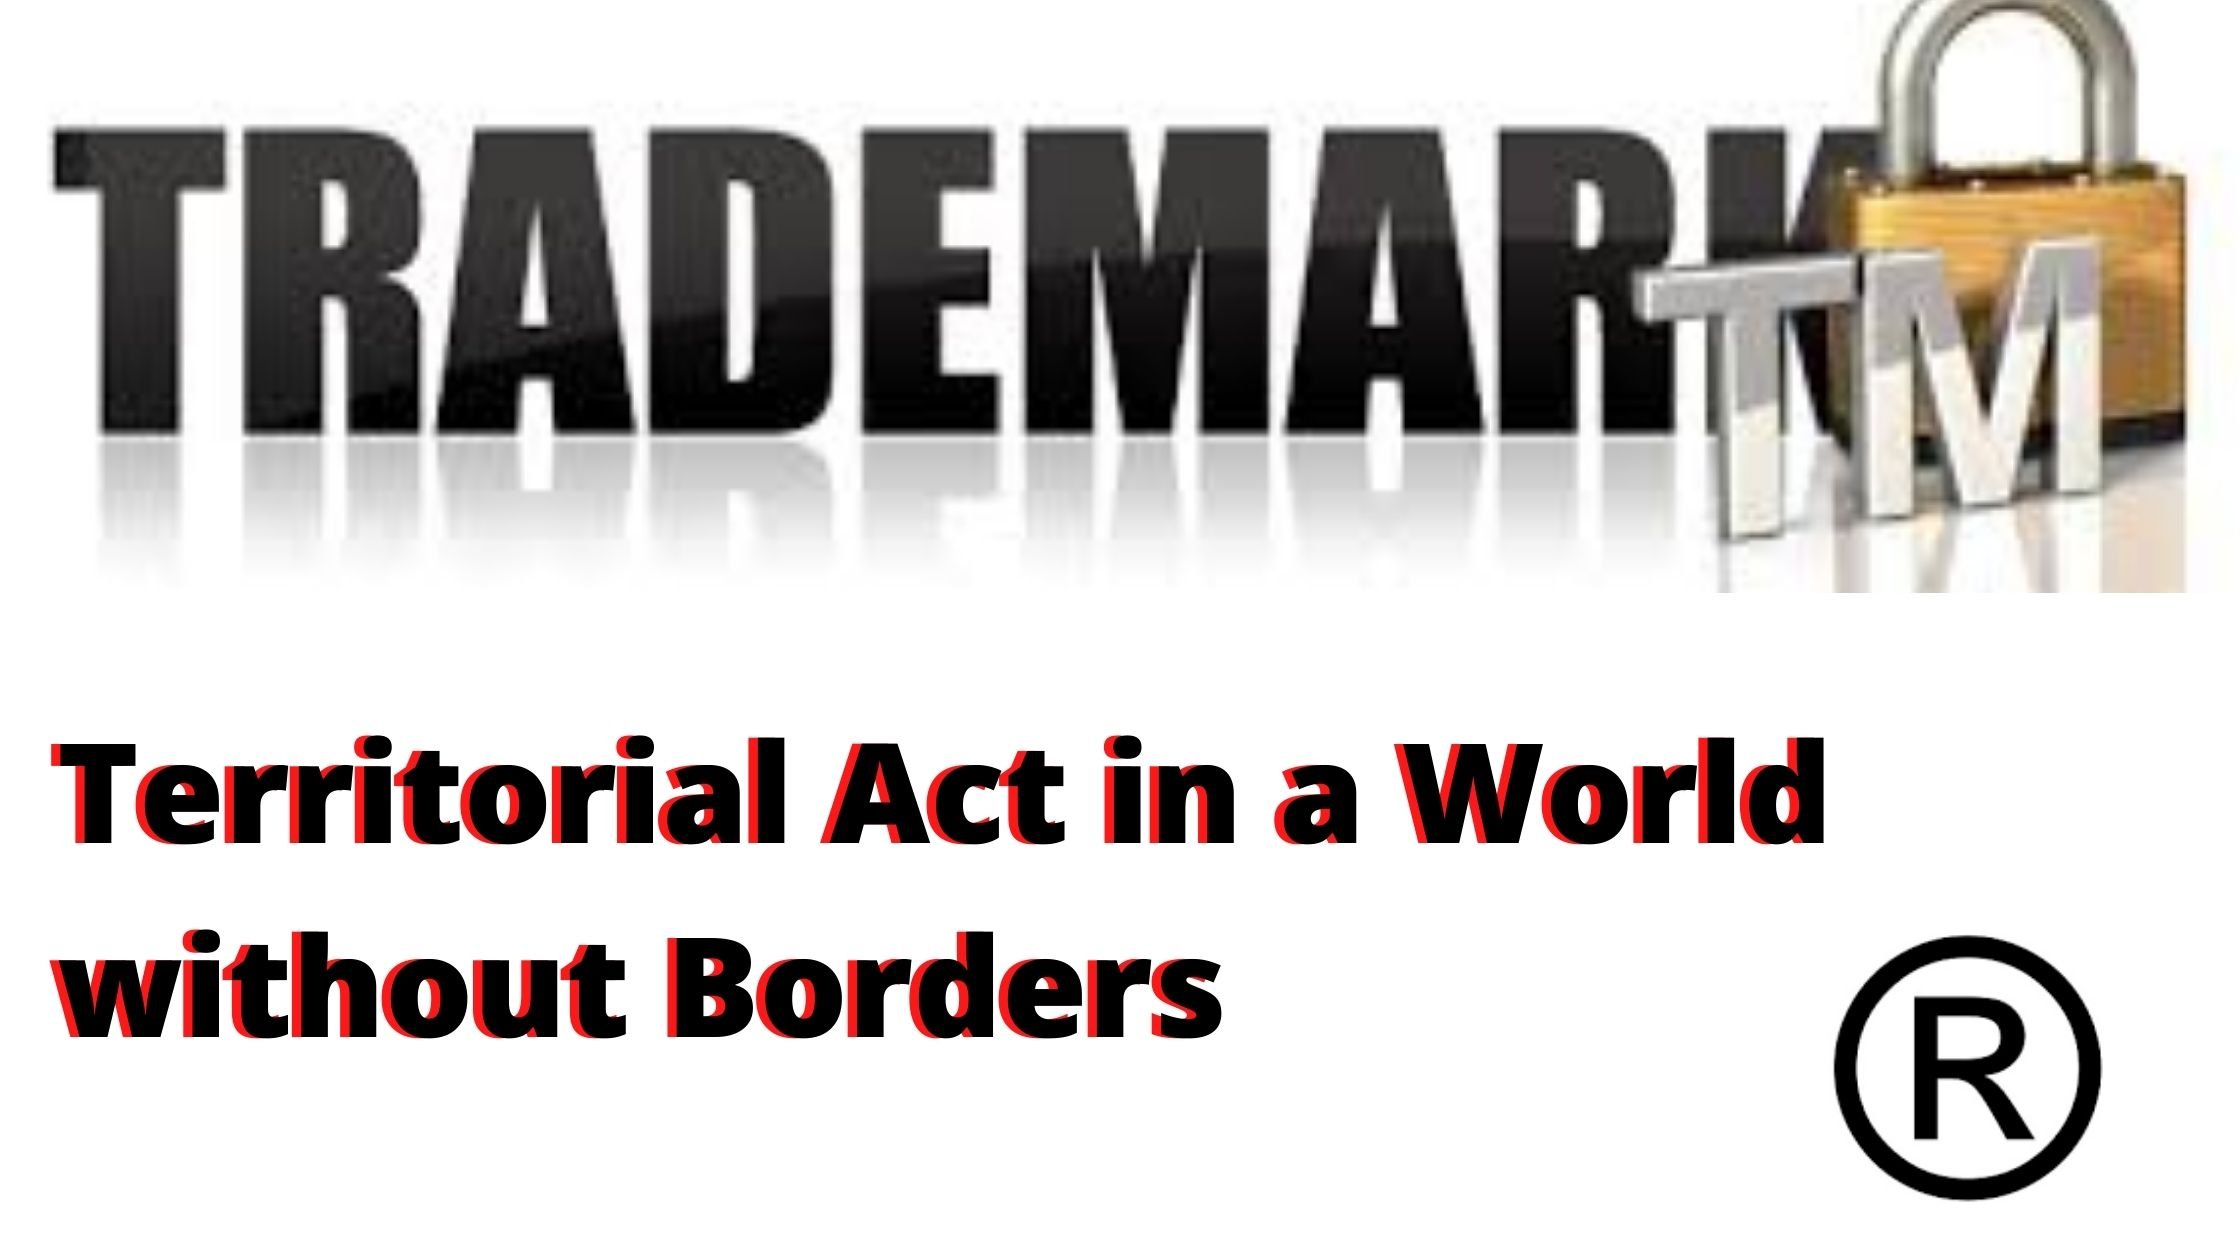 TERRITORIALITY ACT OF TRADEMARKS IN A WORLD WITHOUT BORDERS